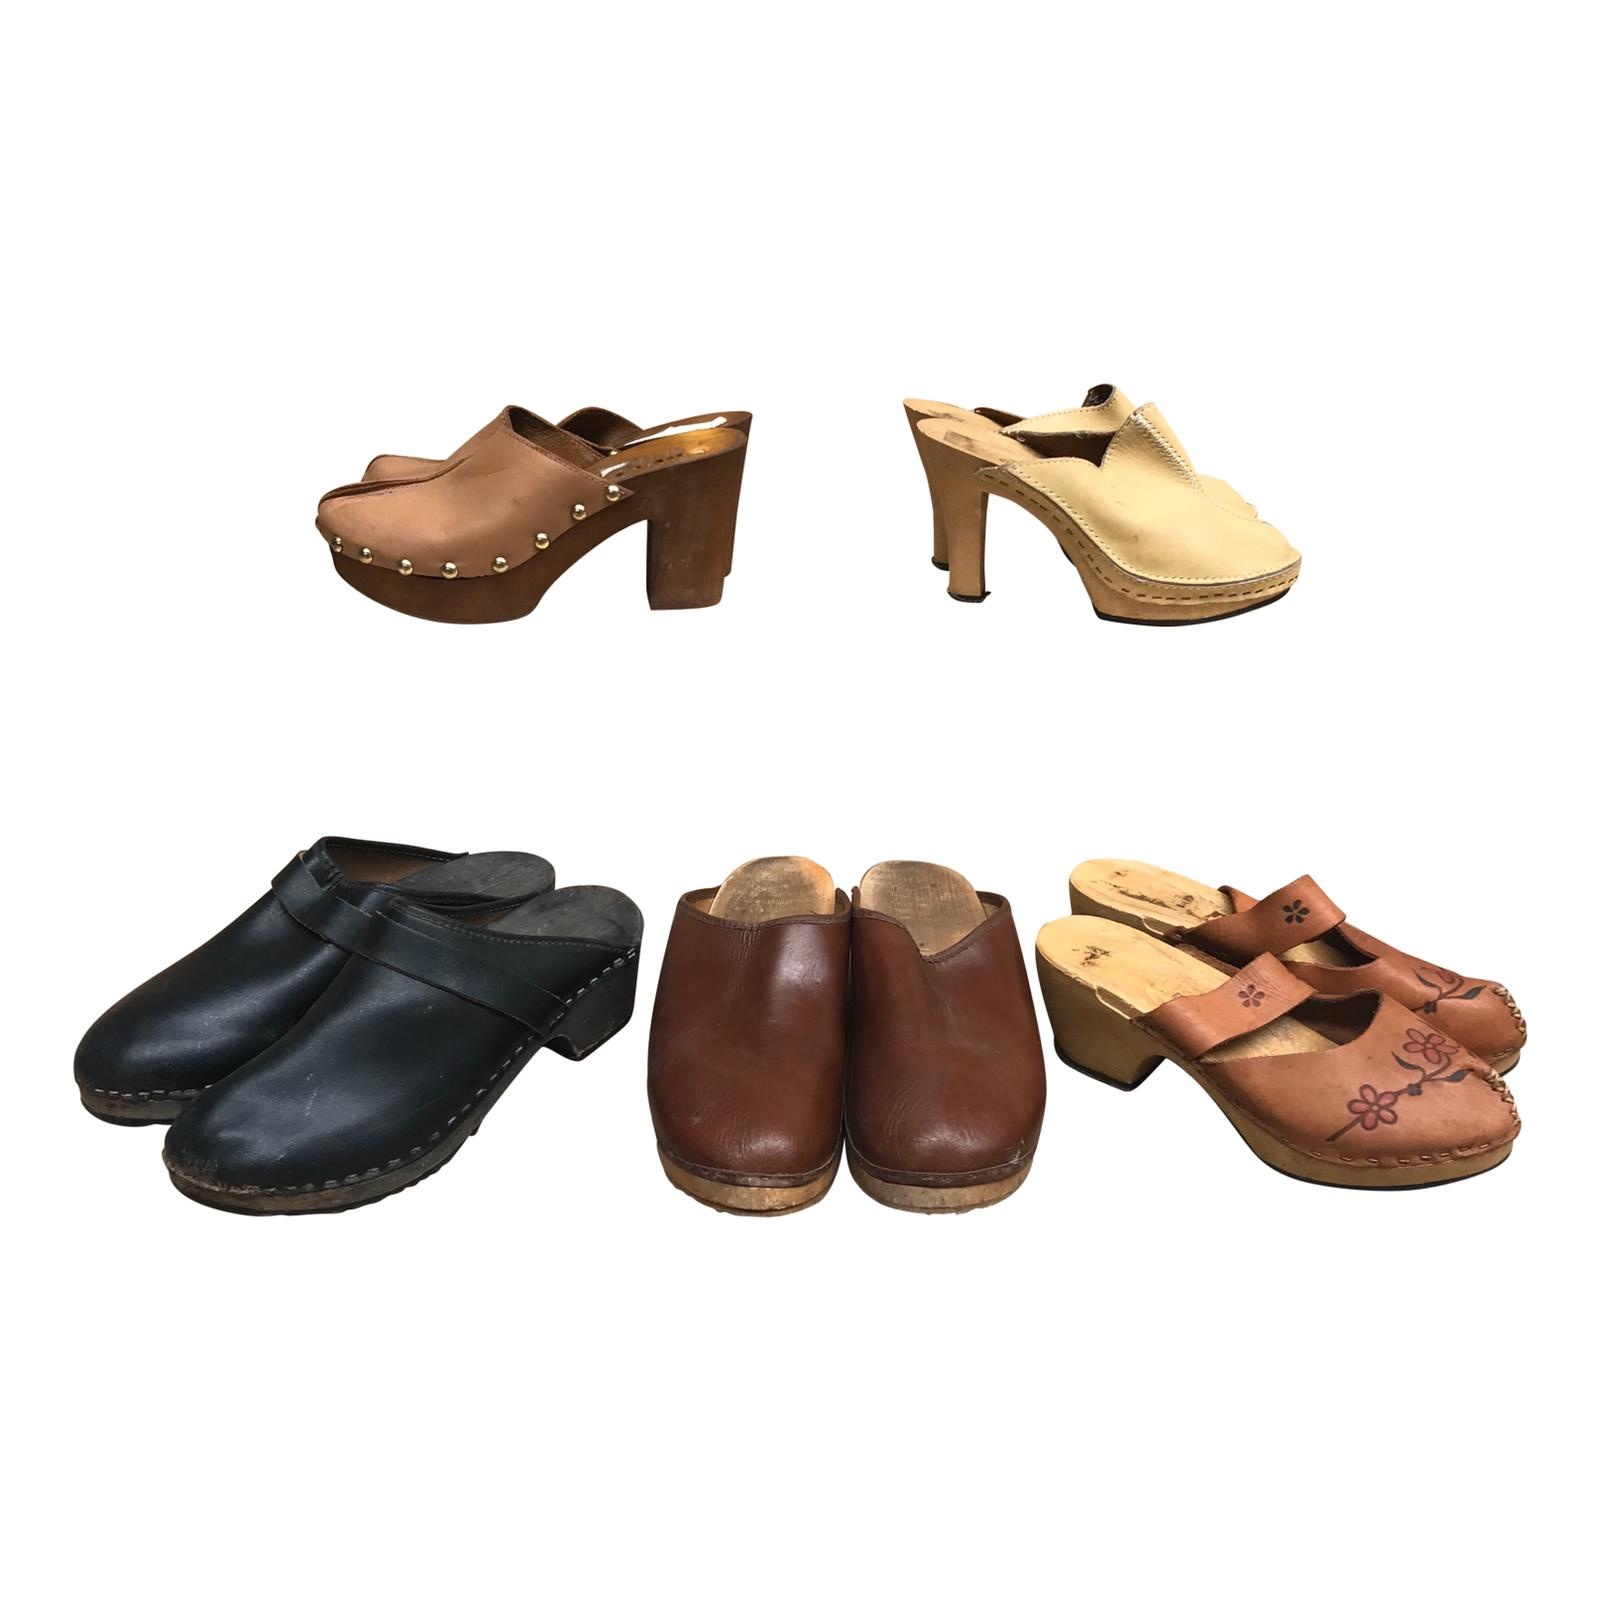 clogs clothing